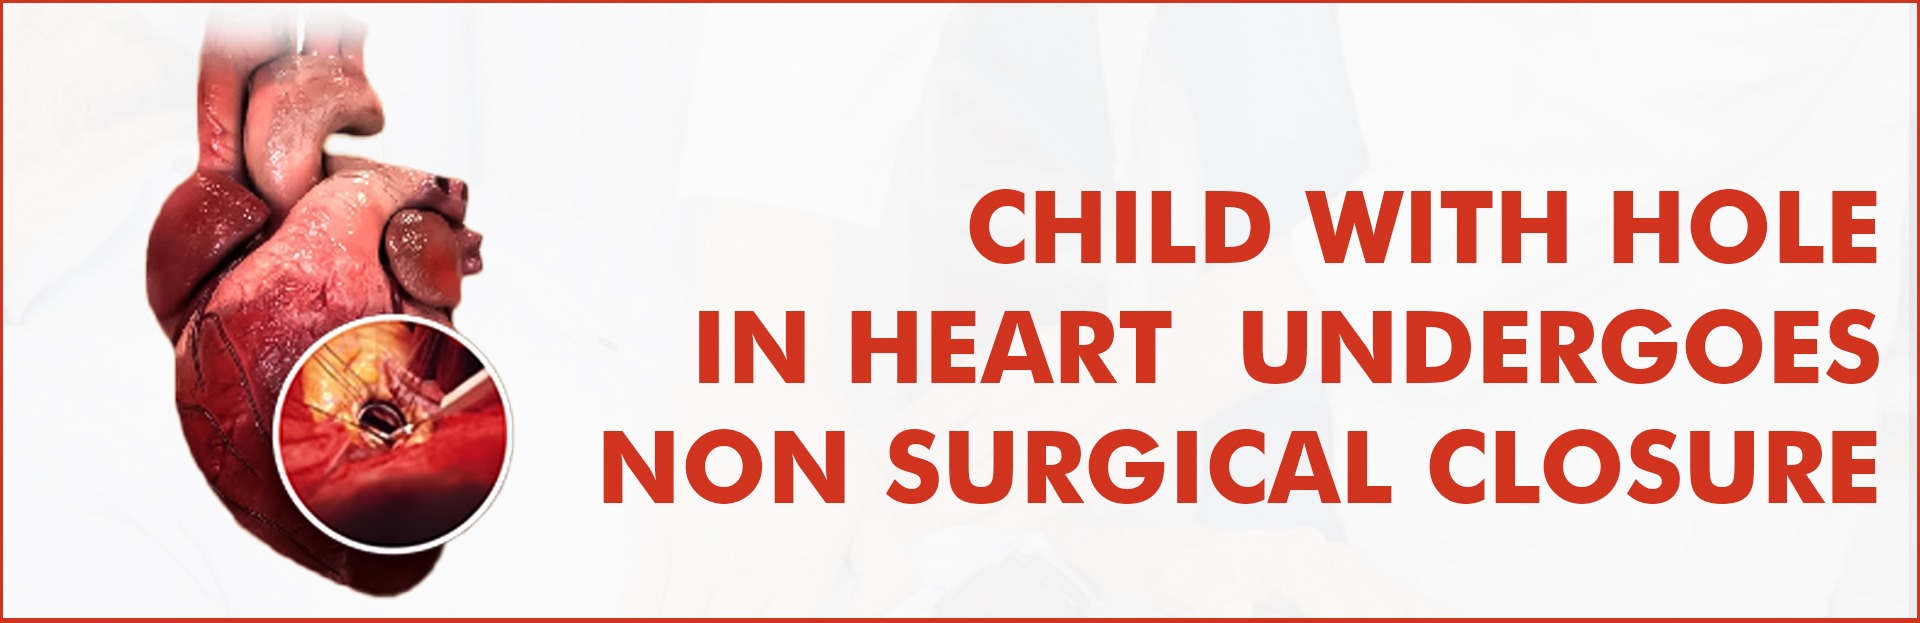 Child with Hole in Heart Undergoes Non Surgical Closure - SPS Hospitals